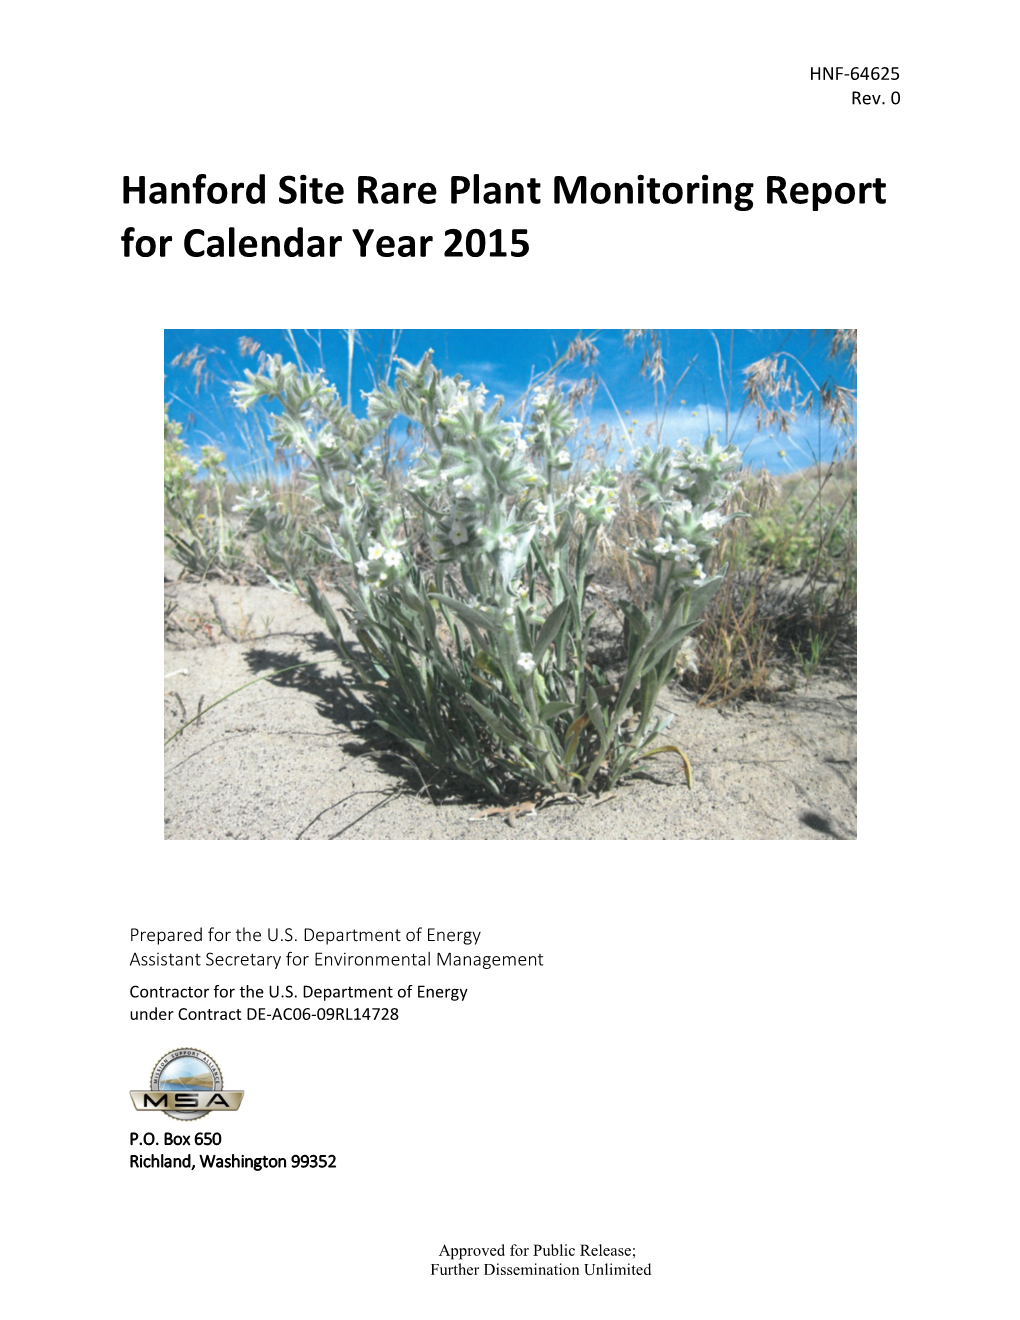 Hanford Site Rare Plant Monitoring Report for Calendar Year 2015